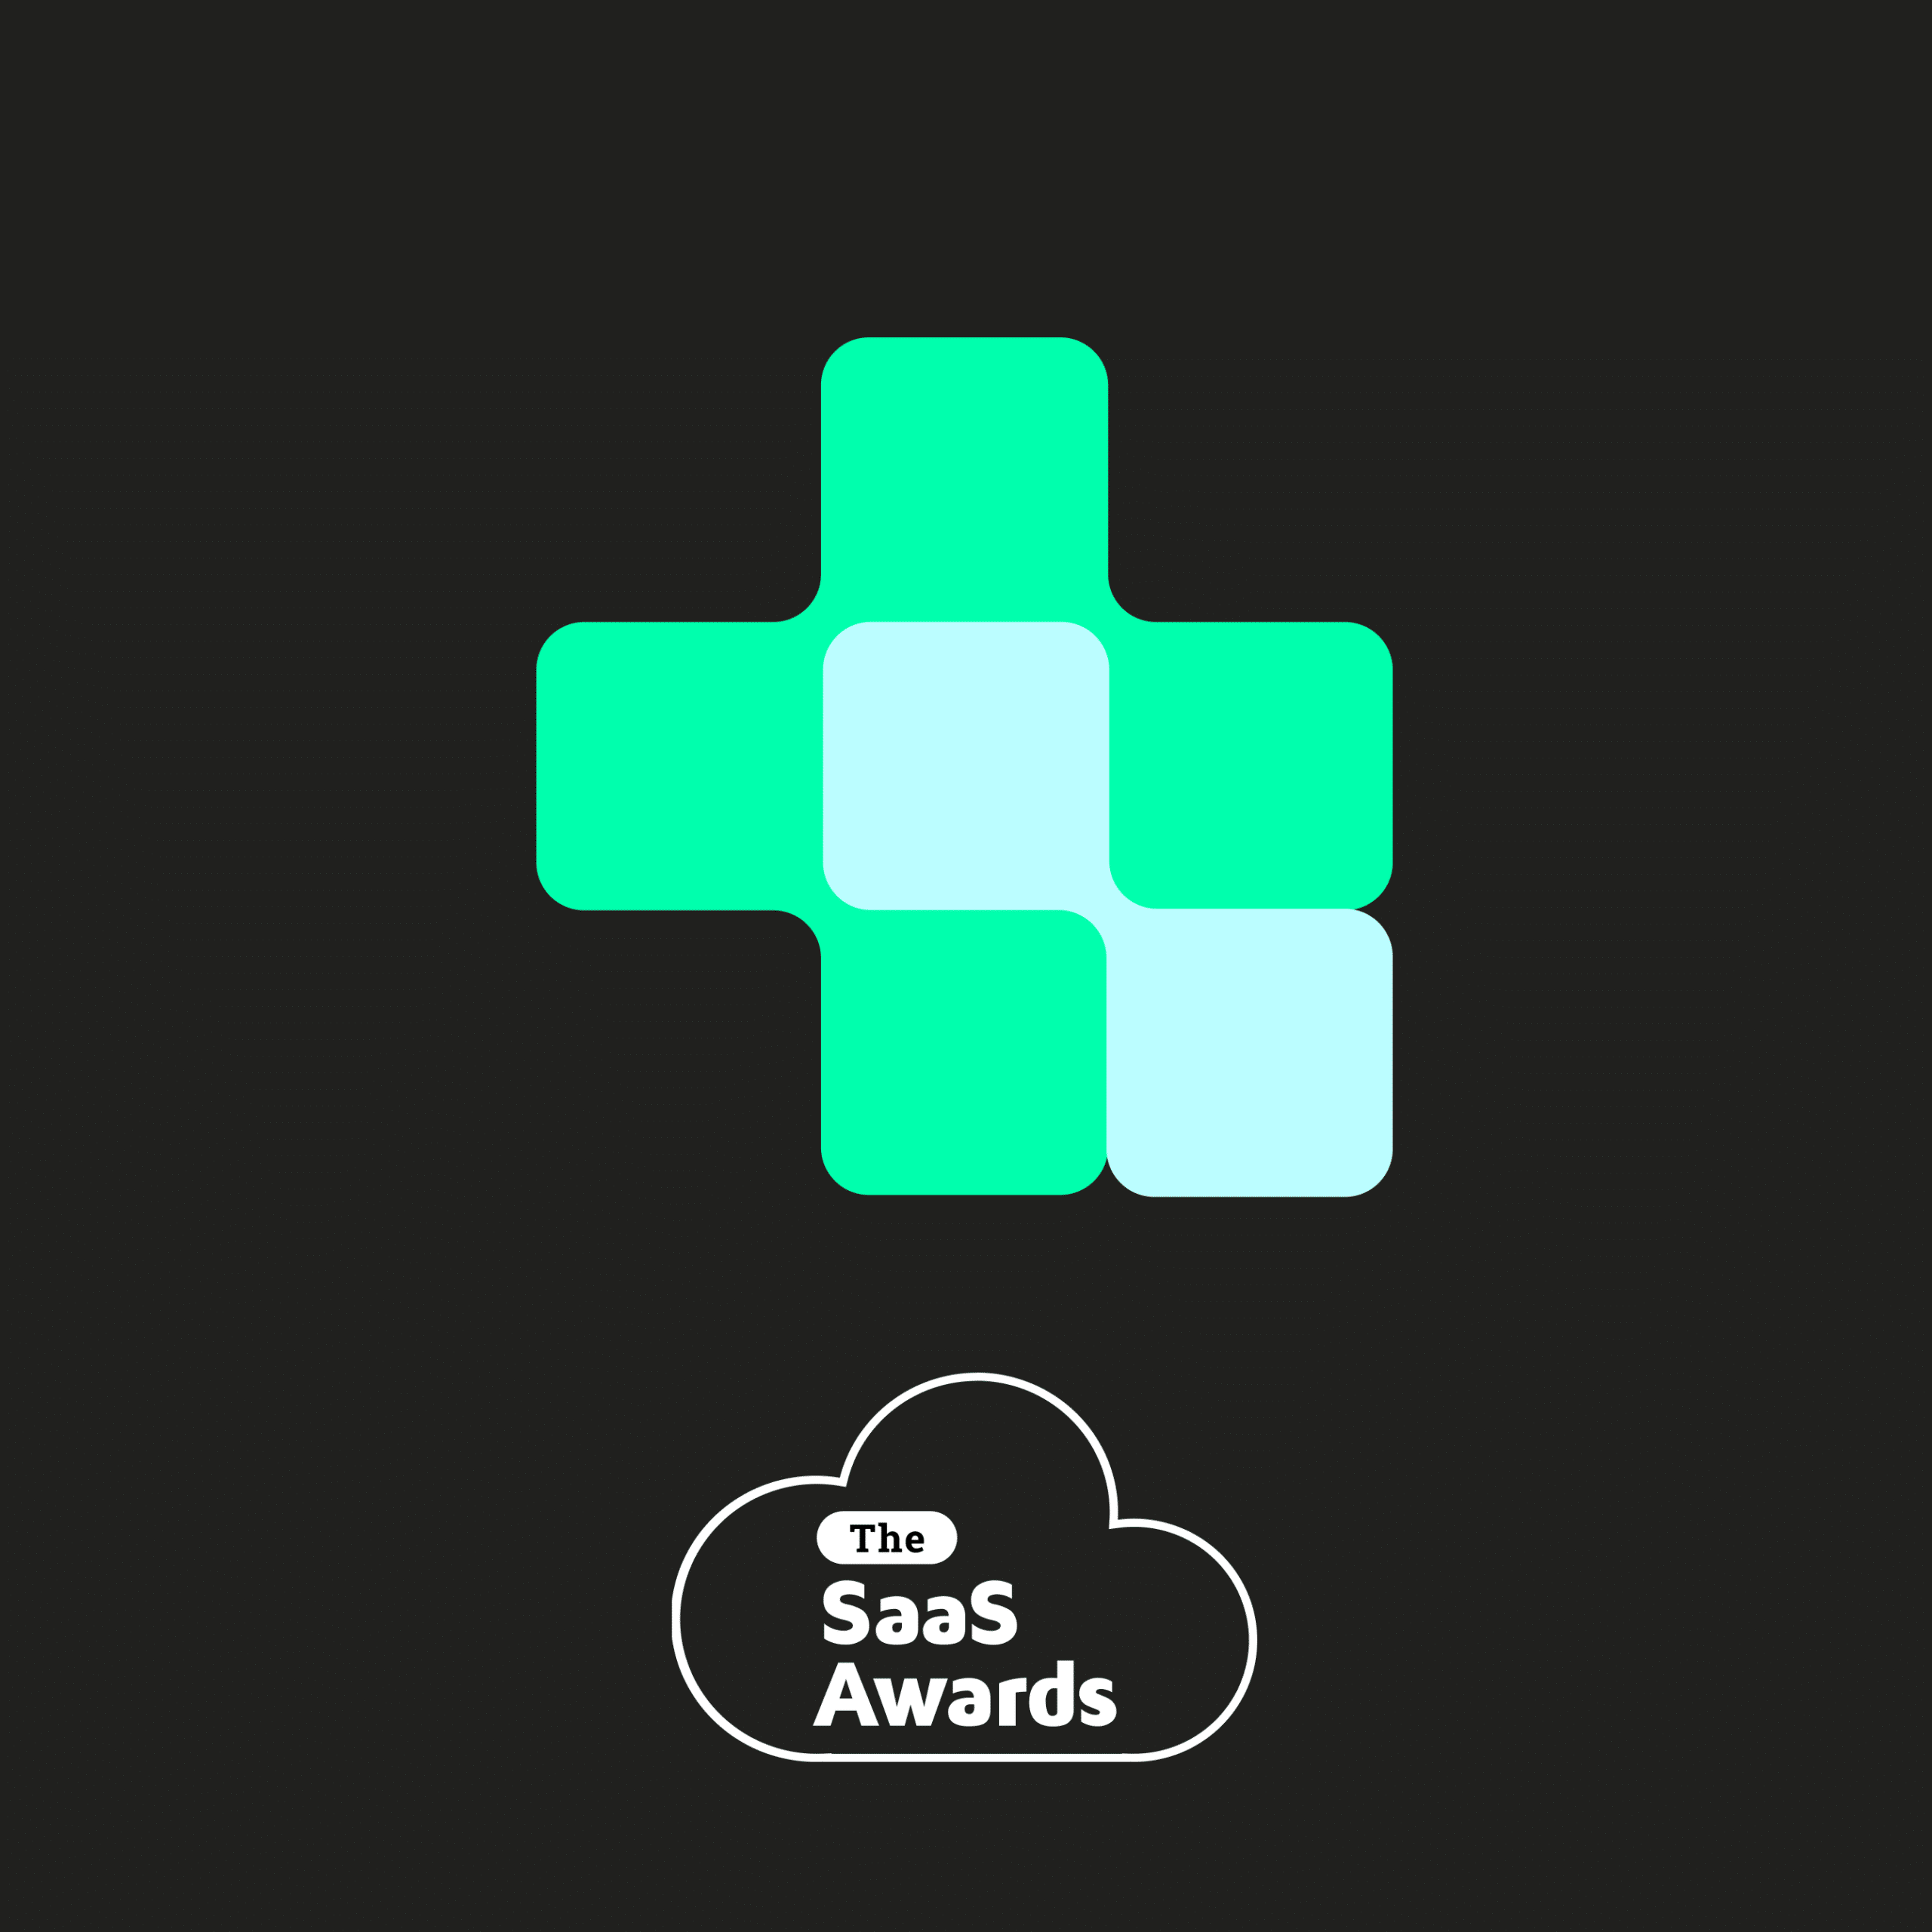 Software as a Service SaaS awards everstox